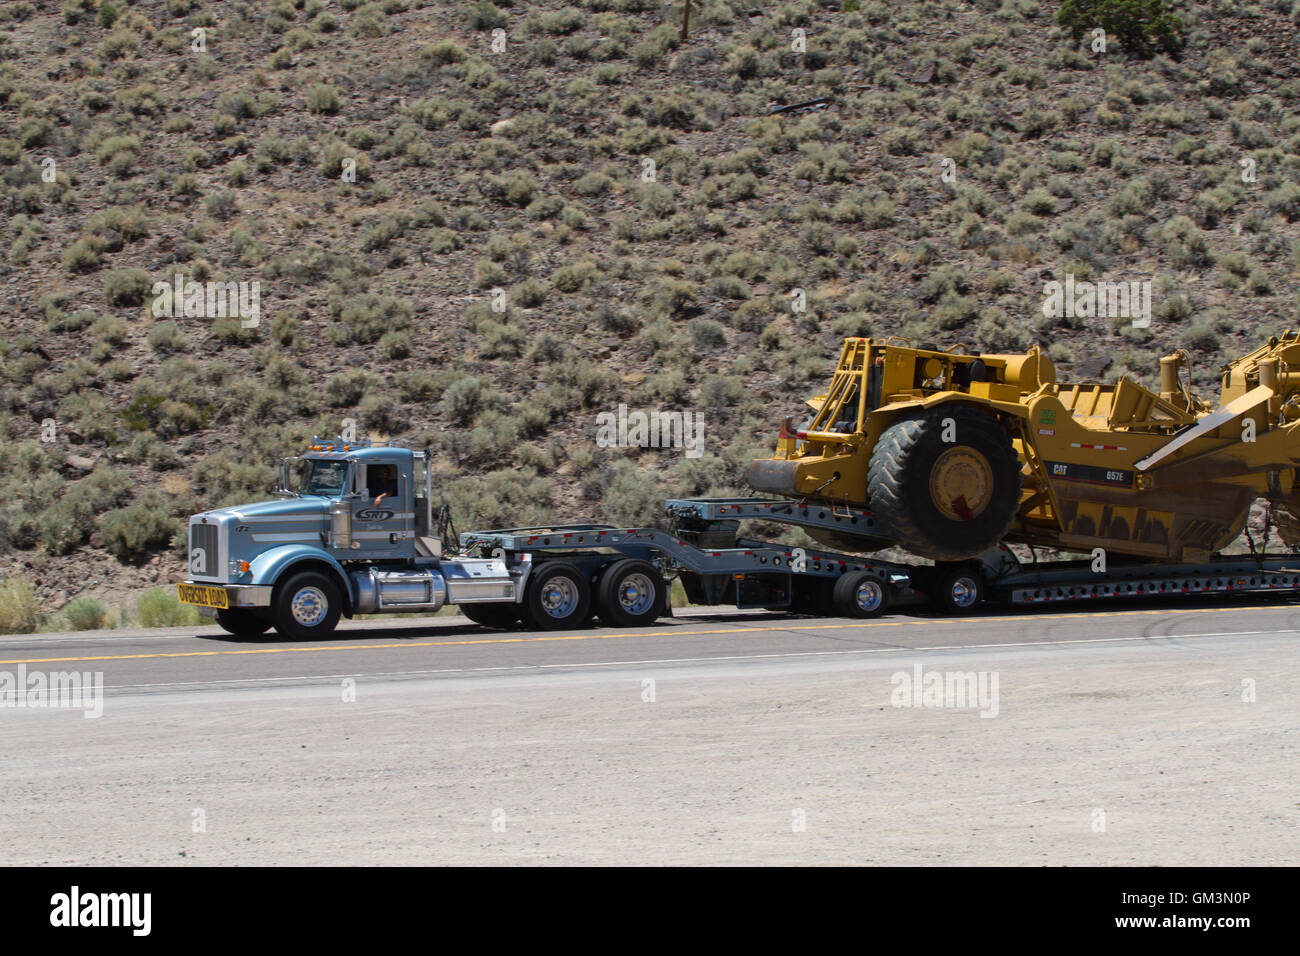 Large truck hauling an earth moving machine. USA Stock Photo